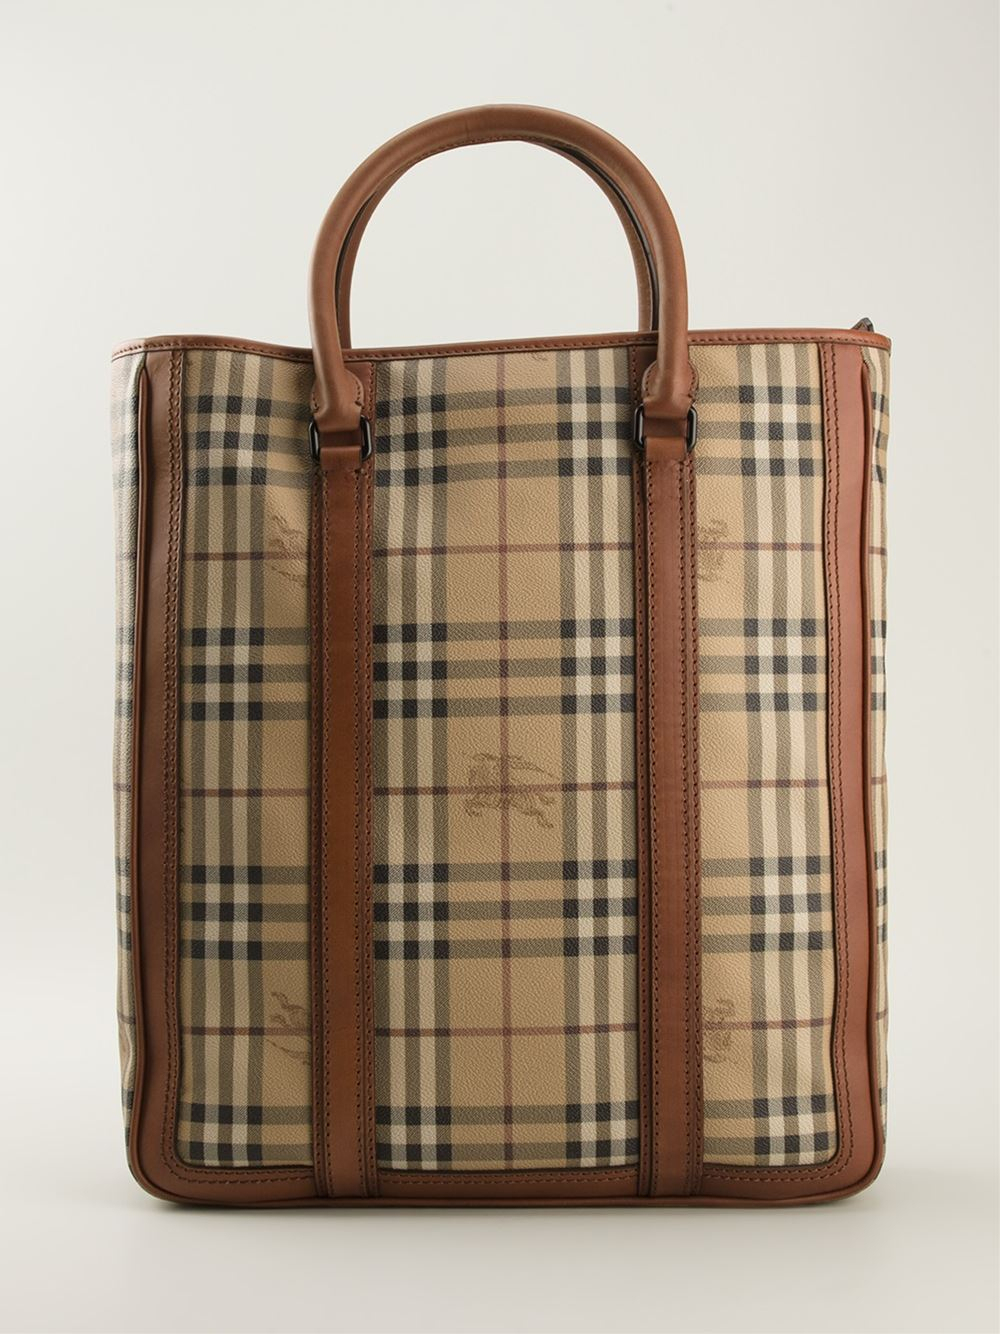 Lyst - Burberry Classic Tote in Brown